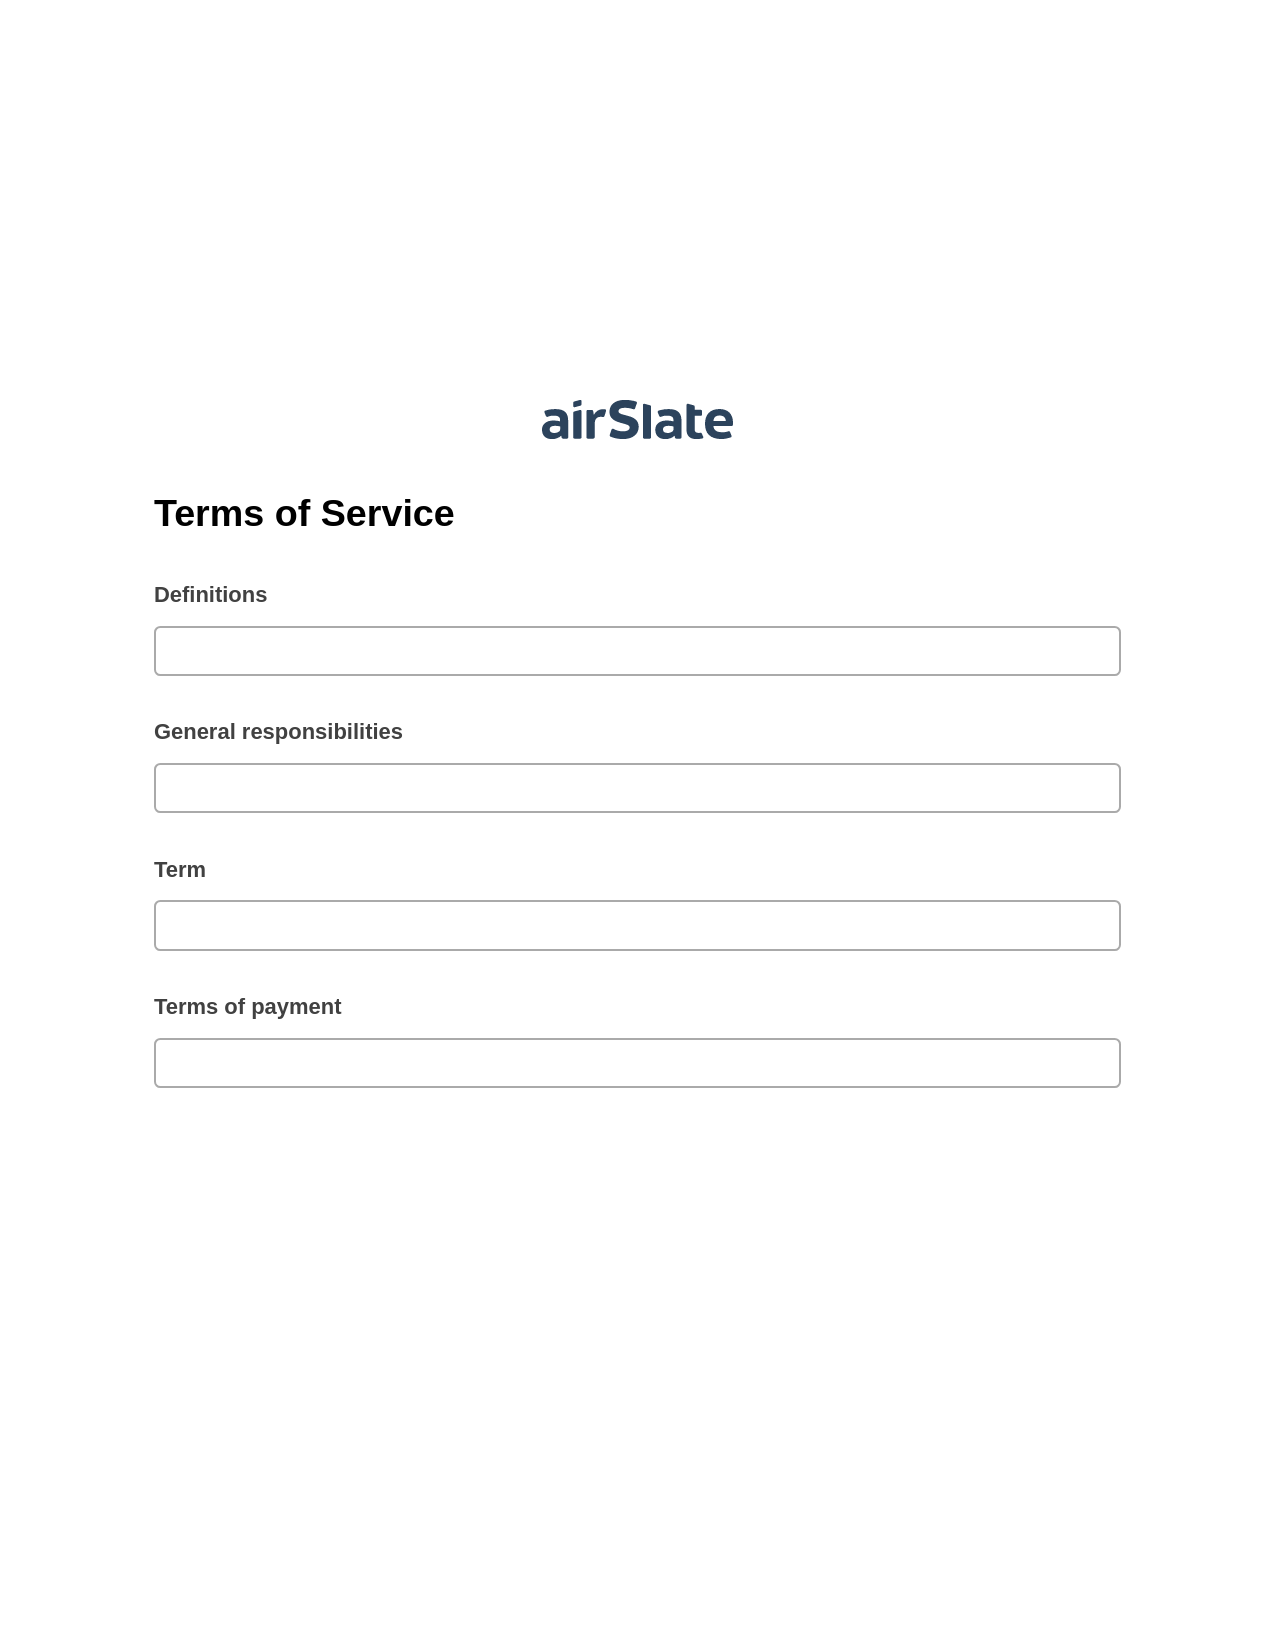 Terms of Service Pre-fill Document Bot, Create slate addon, Archive to SharePoint Folder Bot